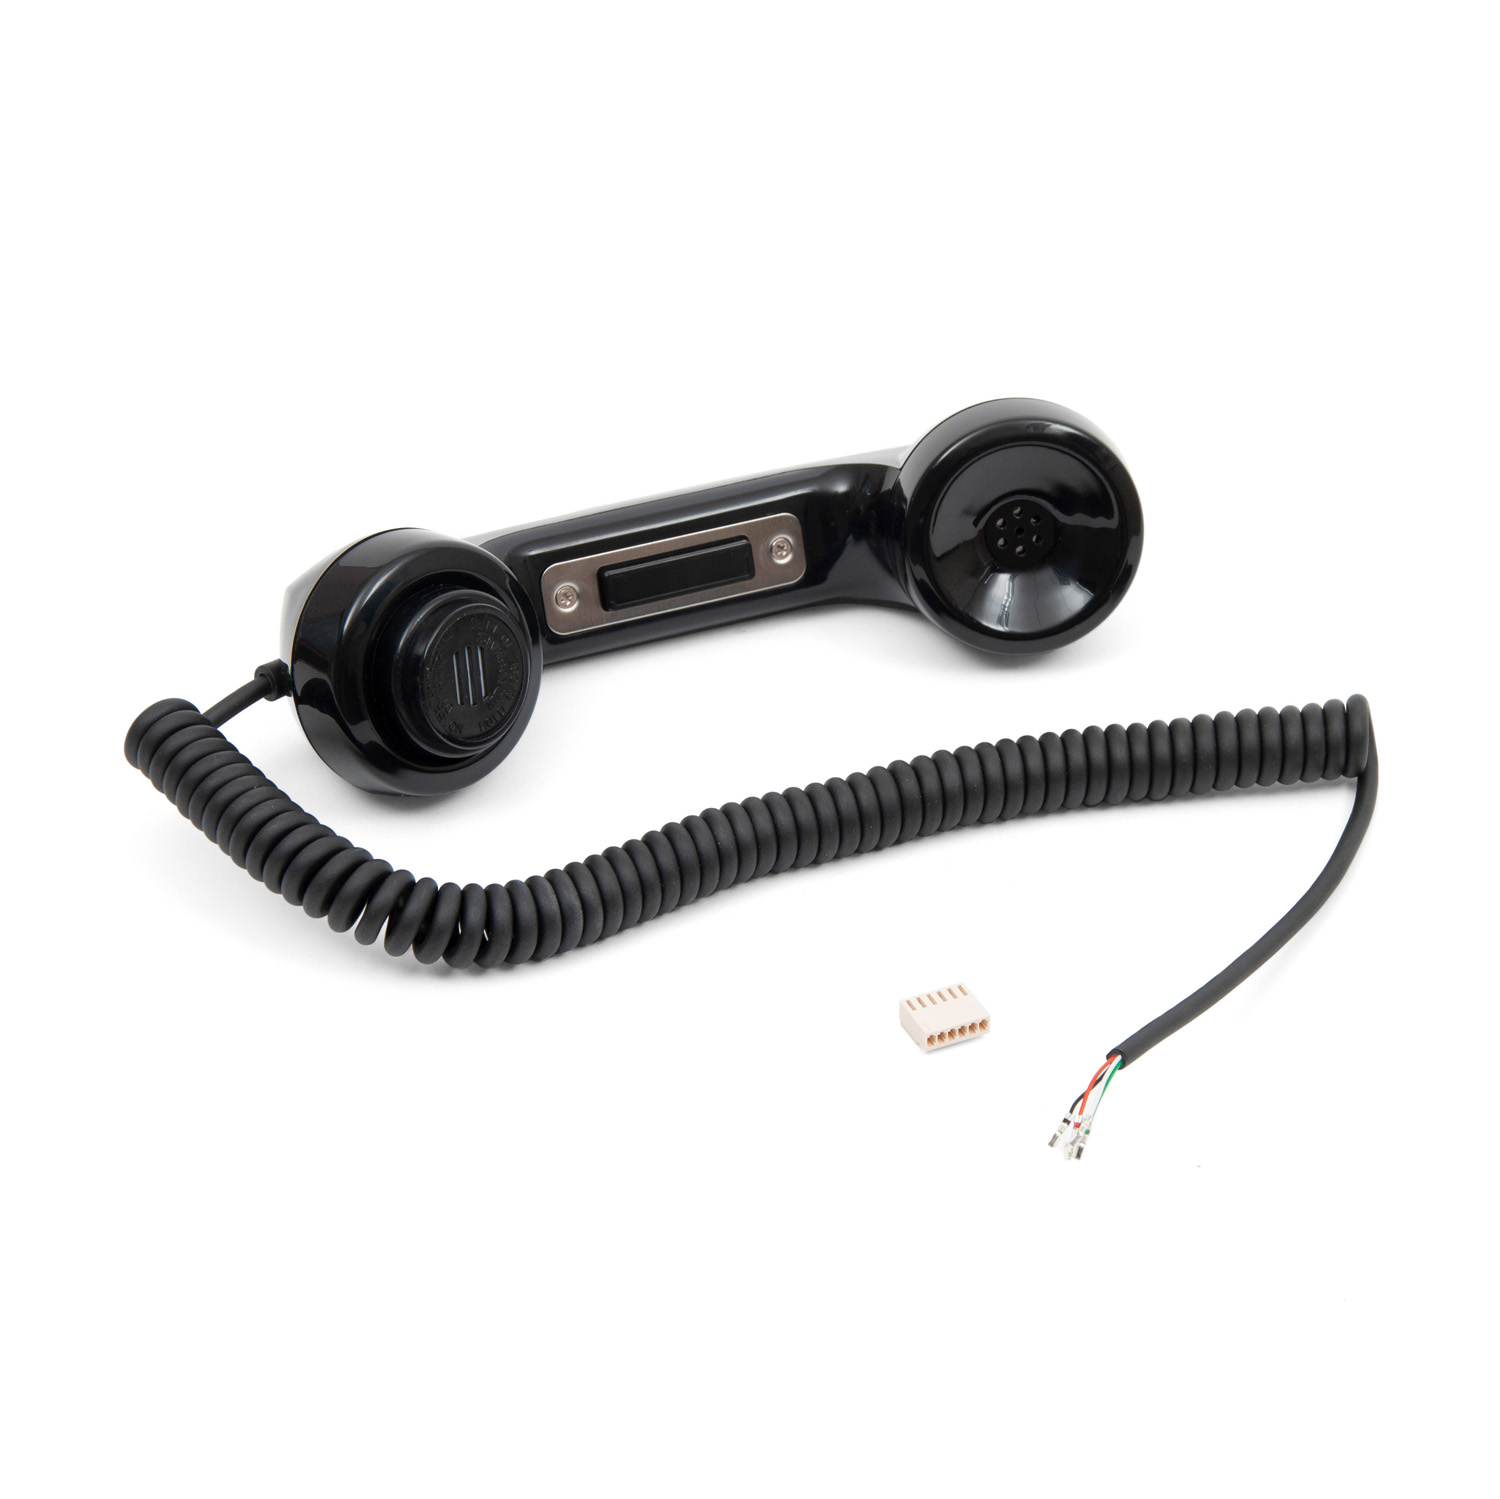 3006090324 66A1940 Handset complete with cord noise cancelling microphone for VSP223